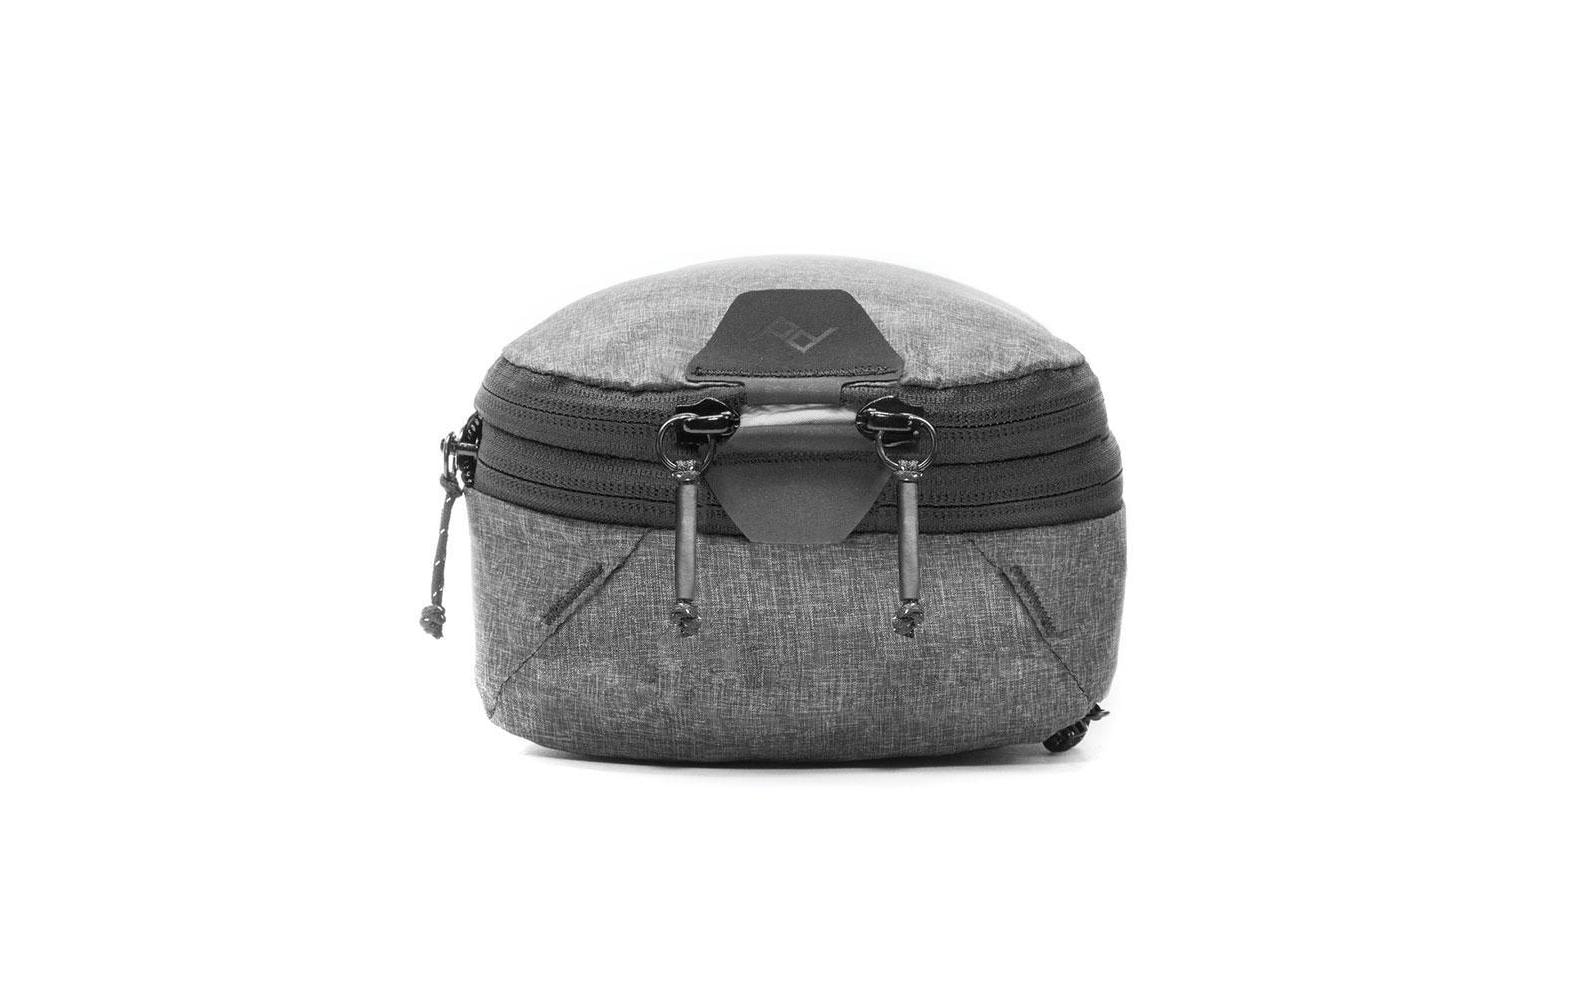 Peak Design Innentasche Packing Cube Small Charcoal